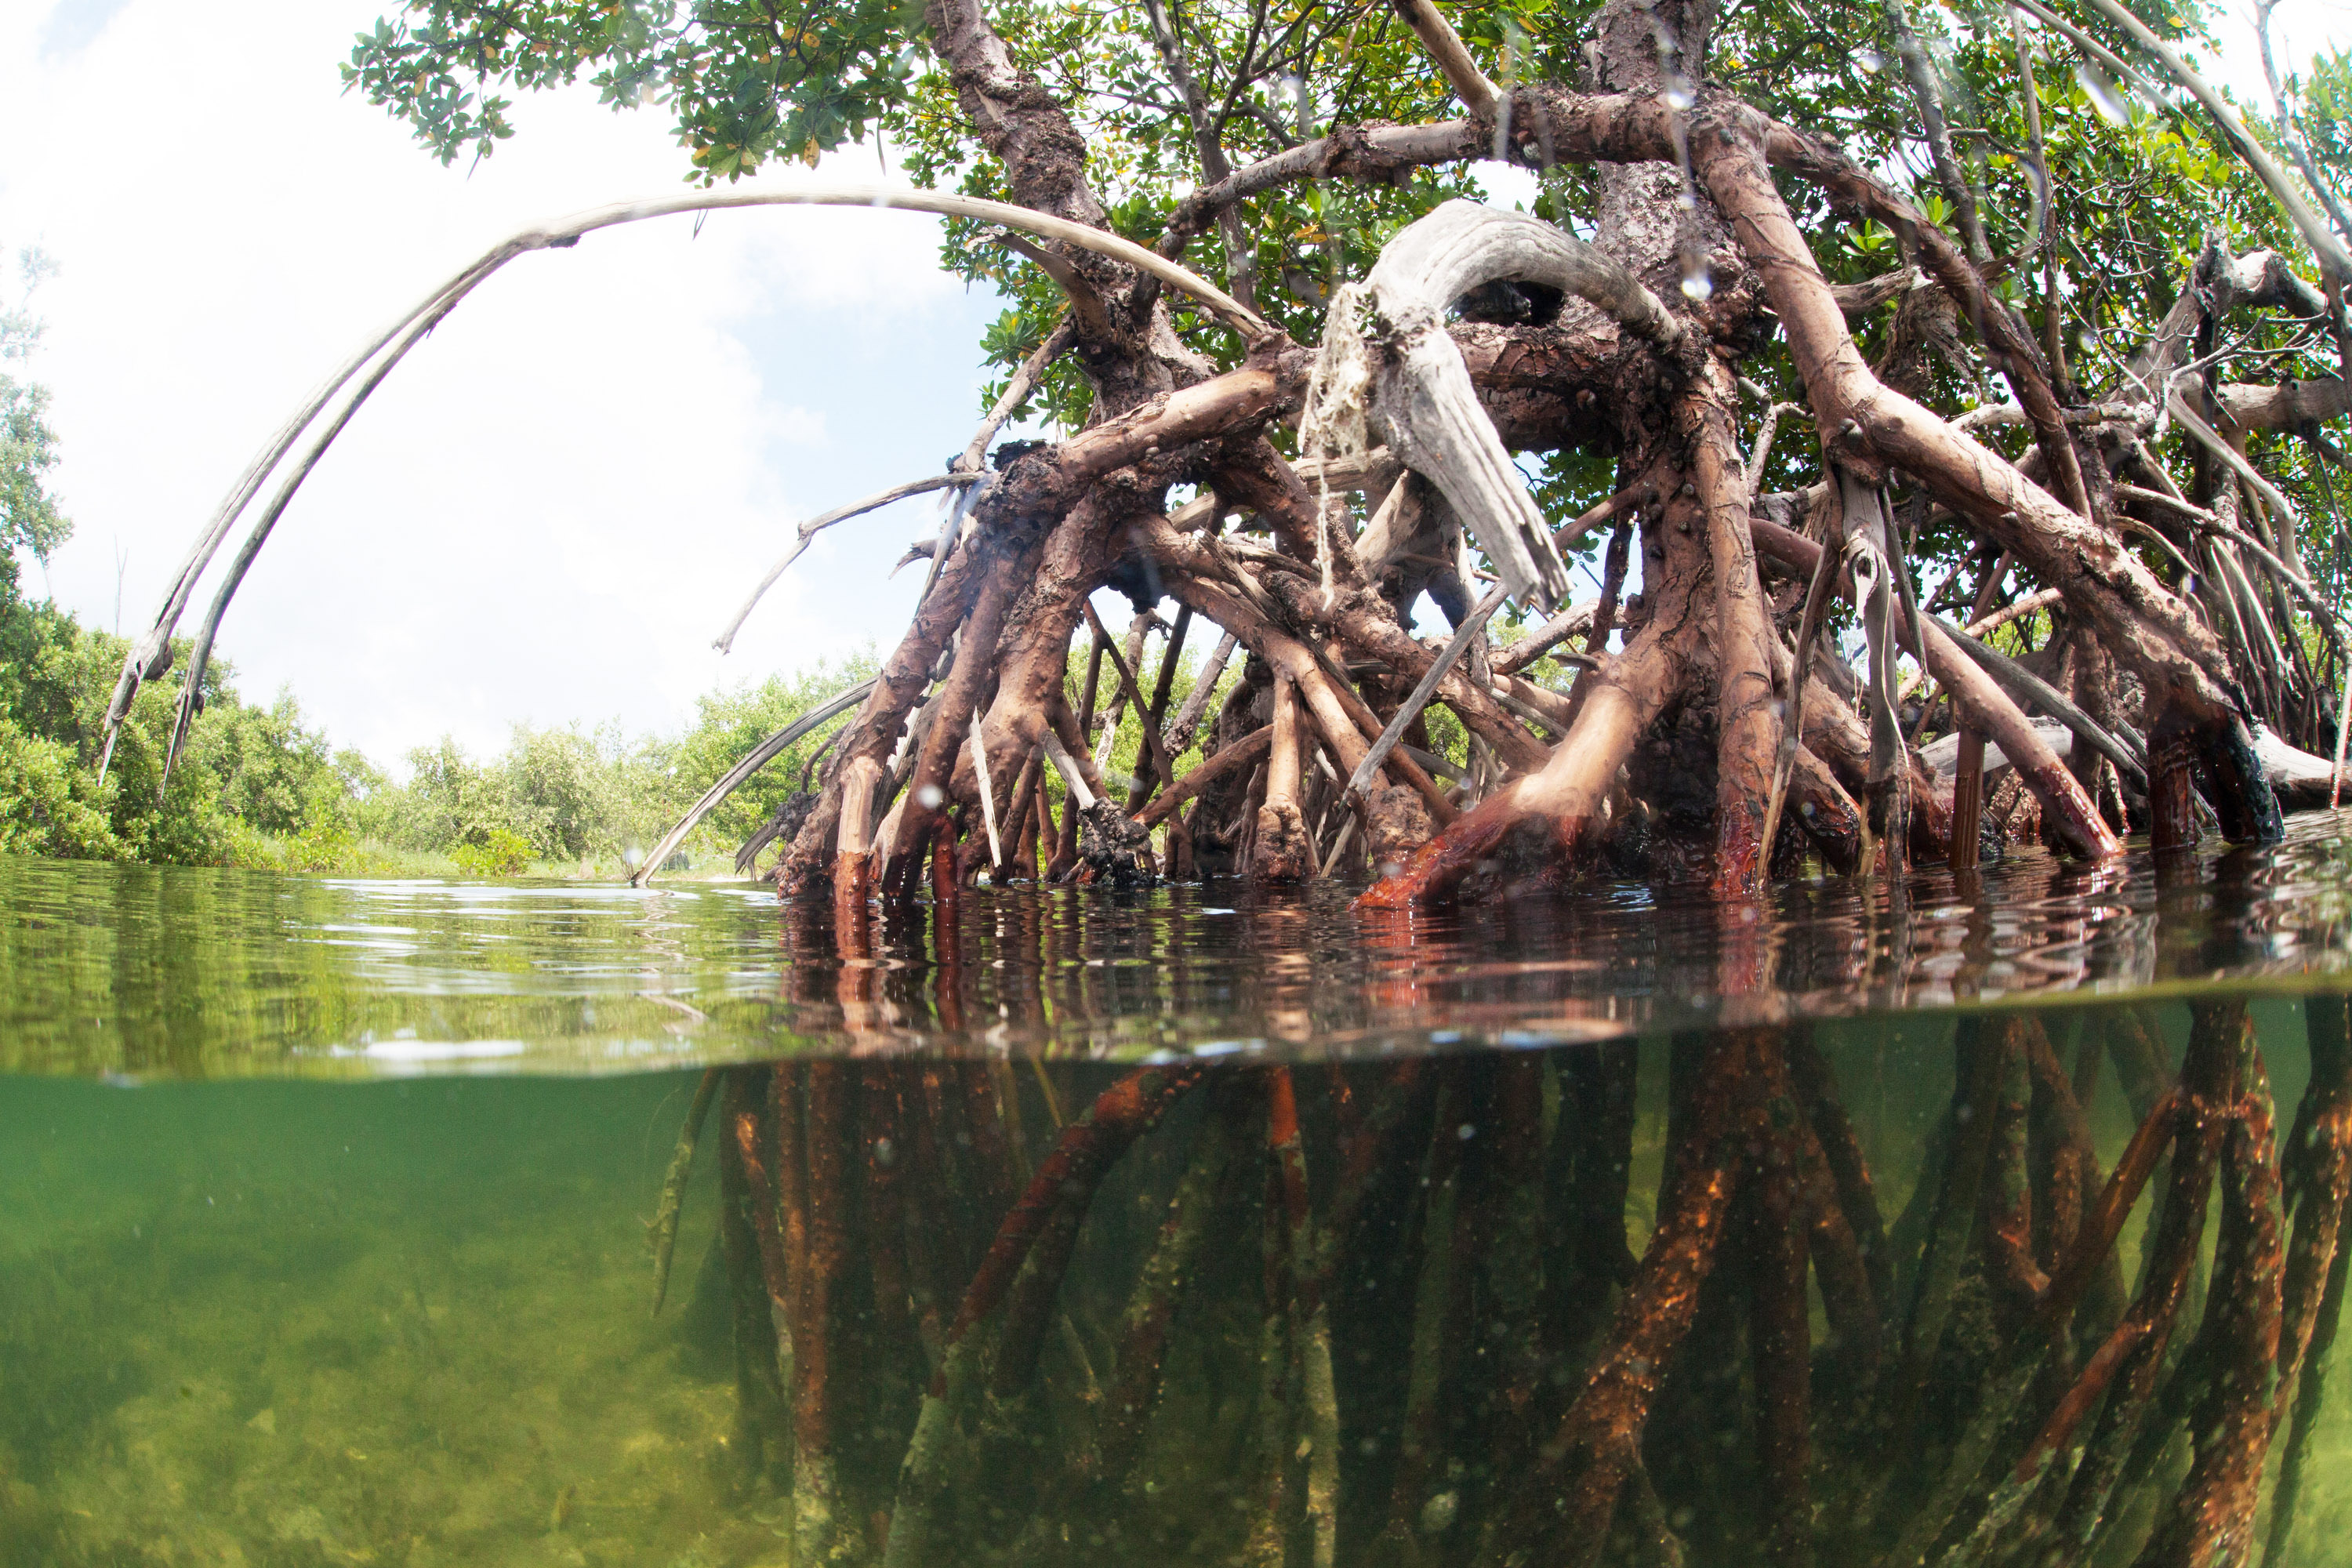 A split view of mangroves, showing both the roots below the water surface and the rest of the tree above.